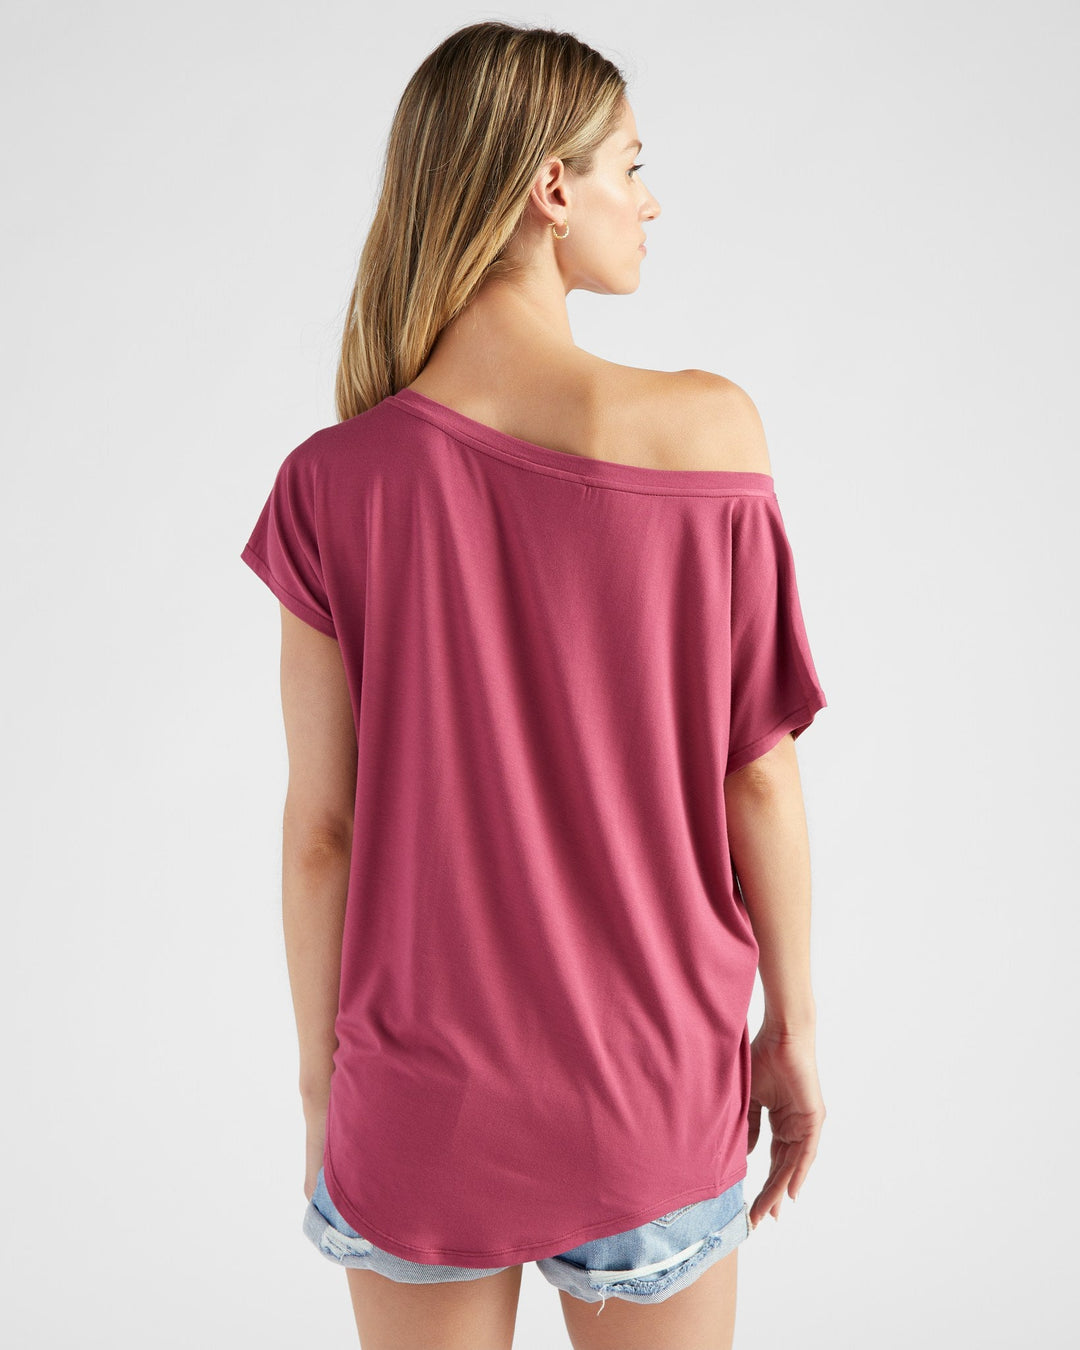 Red Plum $|& 78&SUNNY Edgewater Off The Shoulder Tee - SOF Back